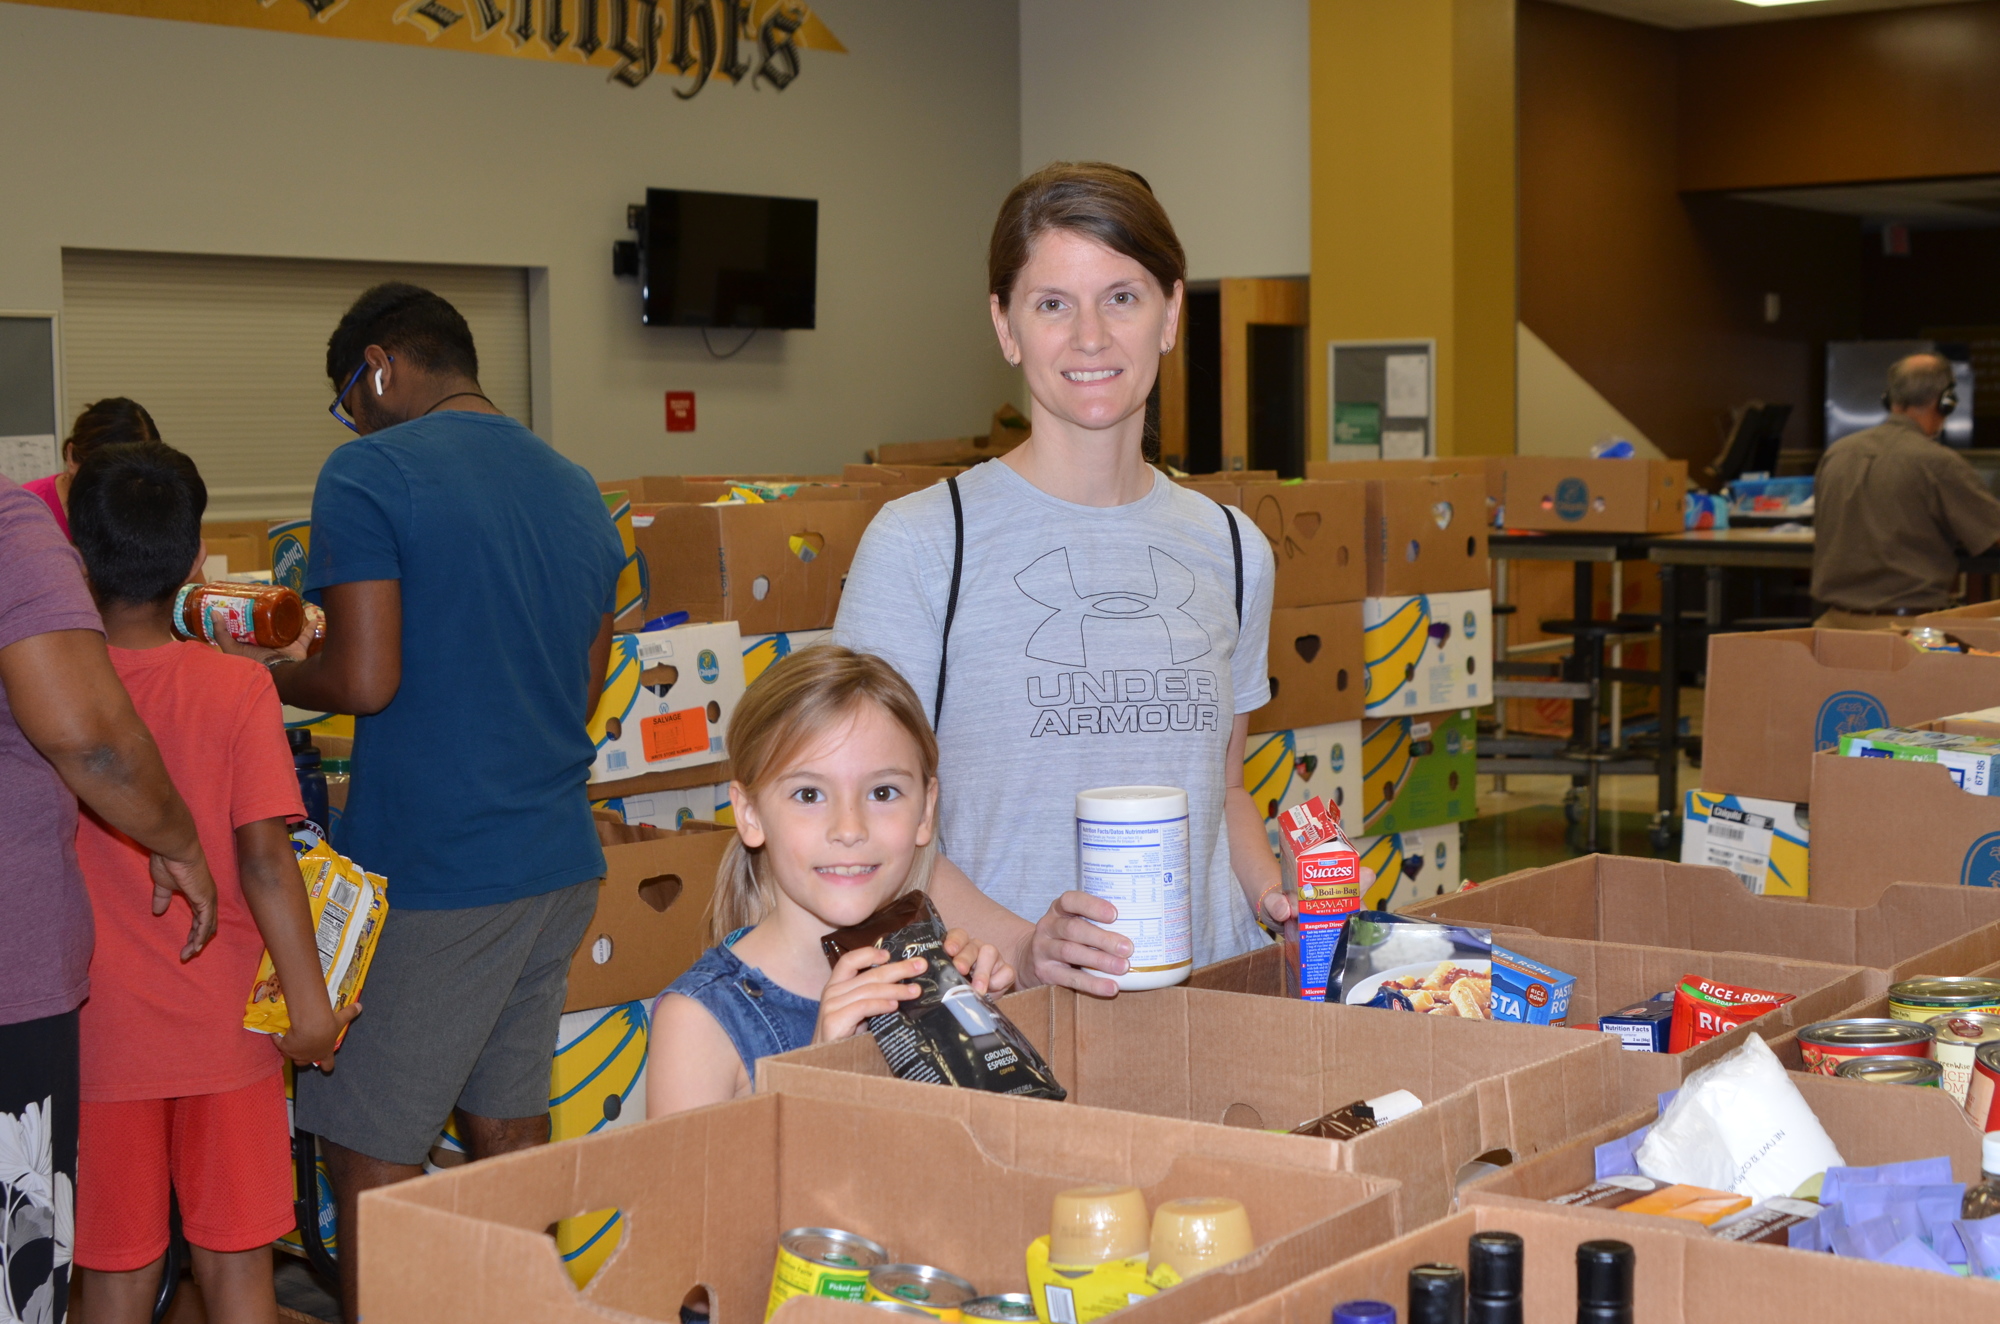 Jessica Cushman, of Ocoee, and her daughter, Maliya, 7, took a shift separating donated items into boxes.